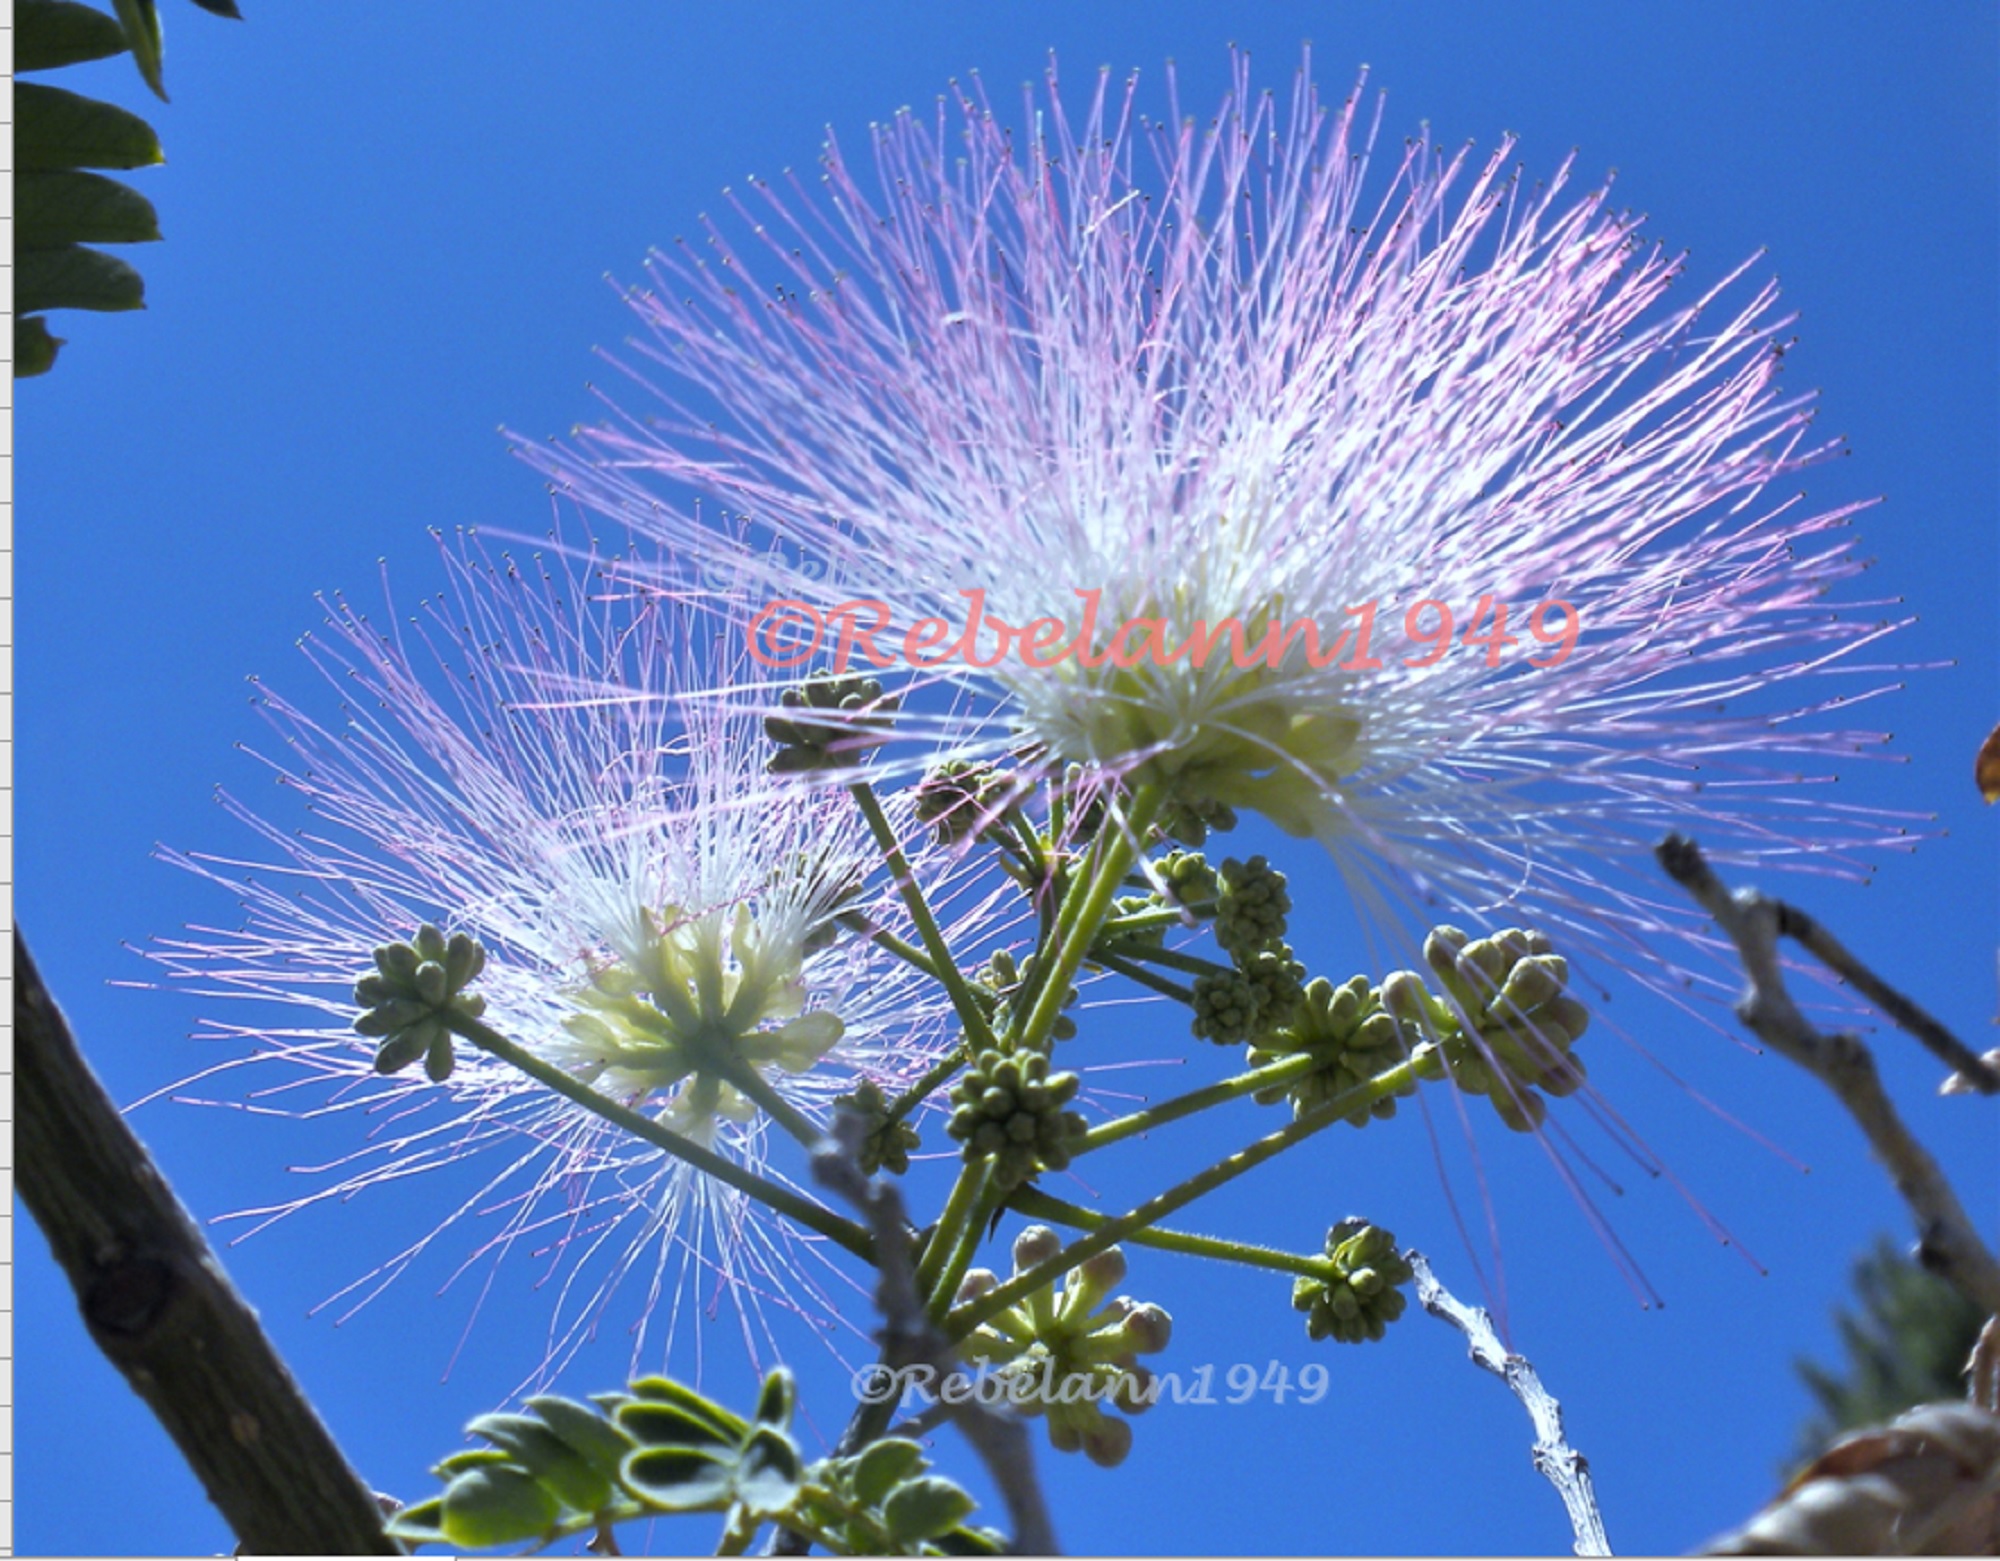 I took this shot of my mimosa blossoms when the sun was shining almost directly into the bloom in May 2011